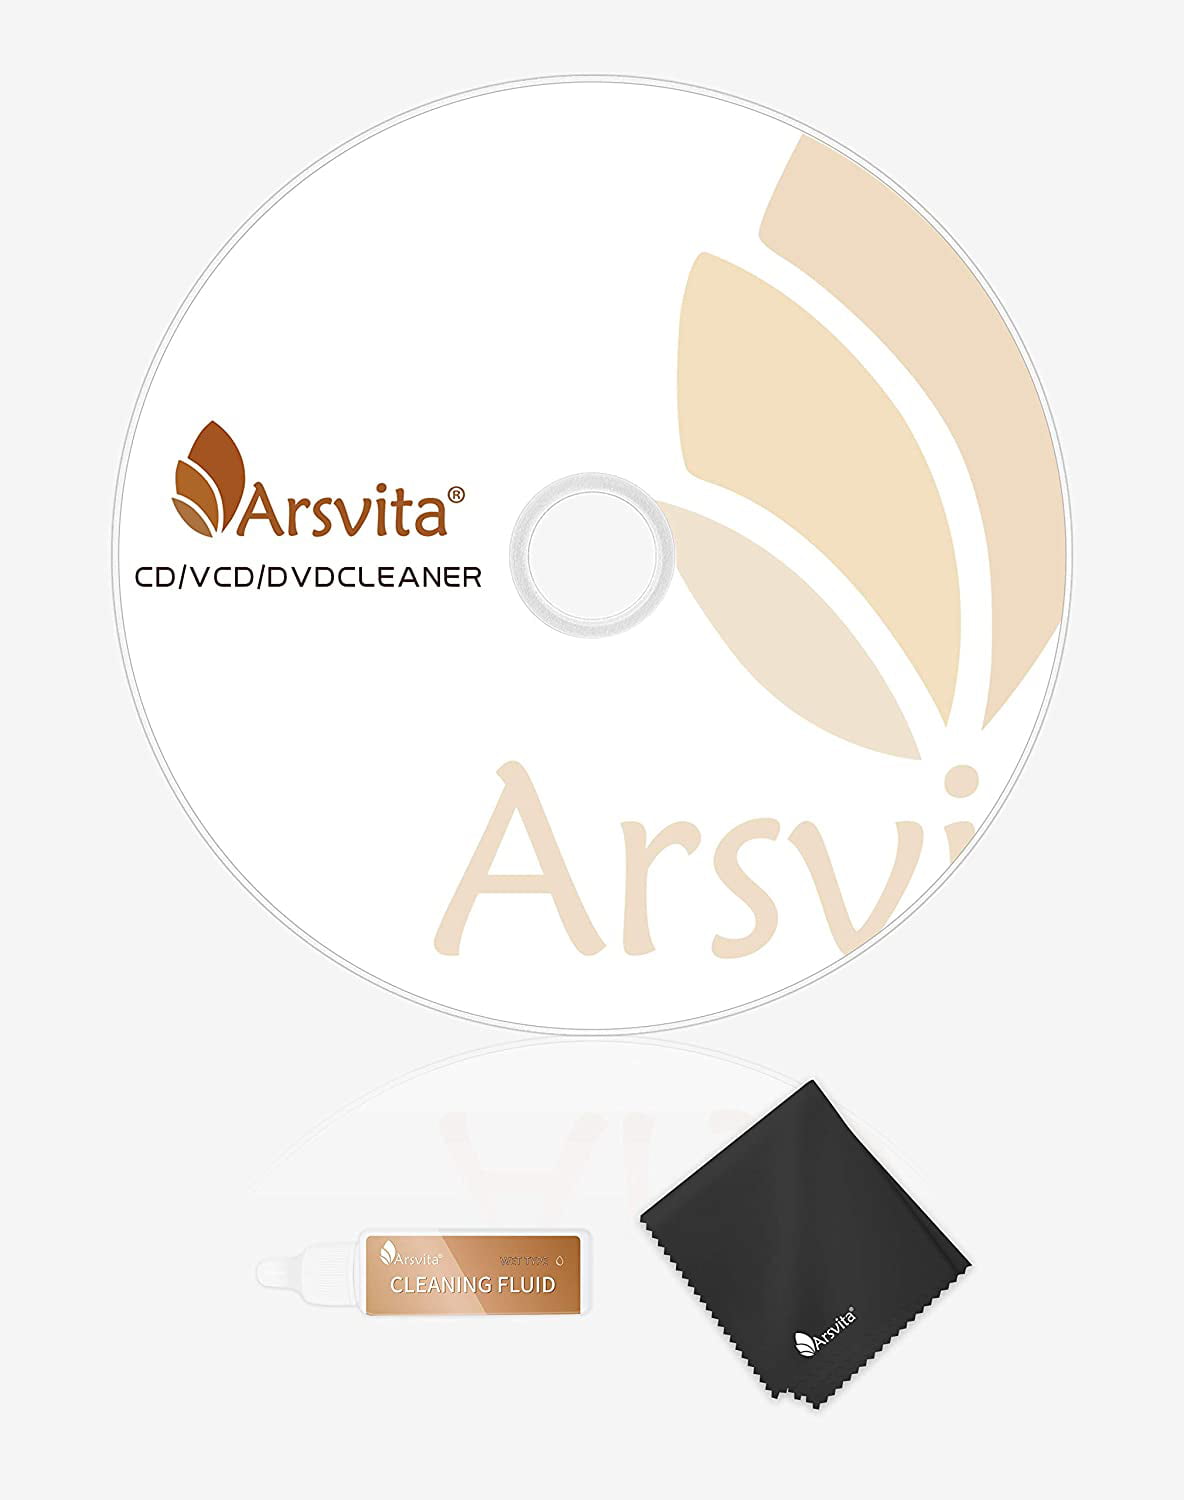 Arsvita Laser Lens Cleaner Disc Cleaning Set for CD/VCD/DVD Player ARCD-03 Safe and Effective 